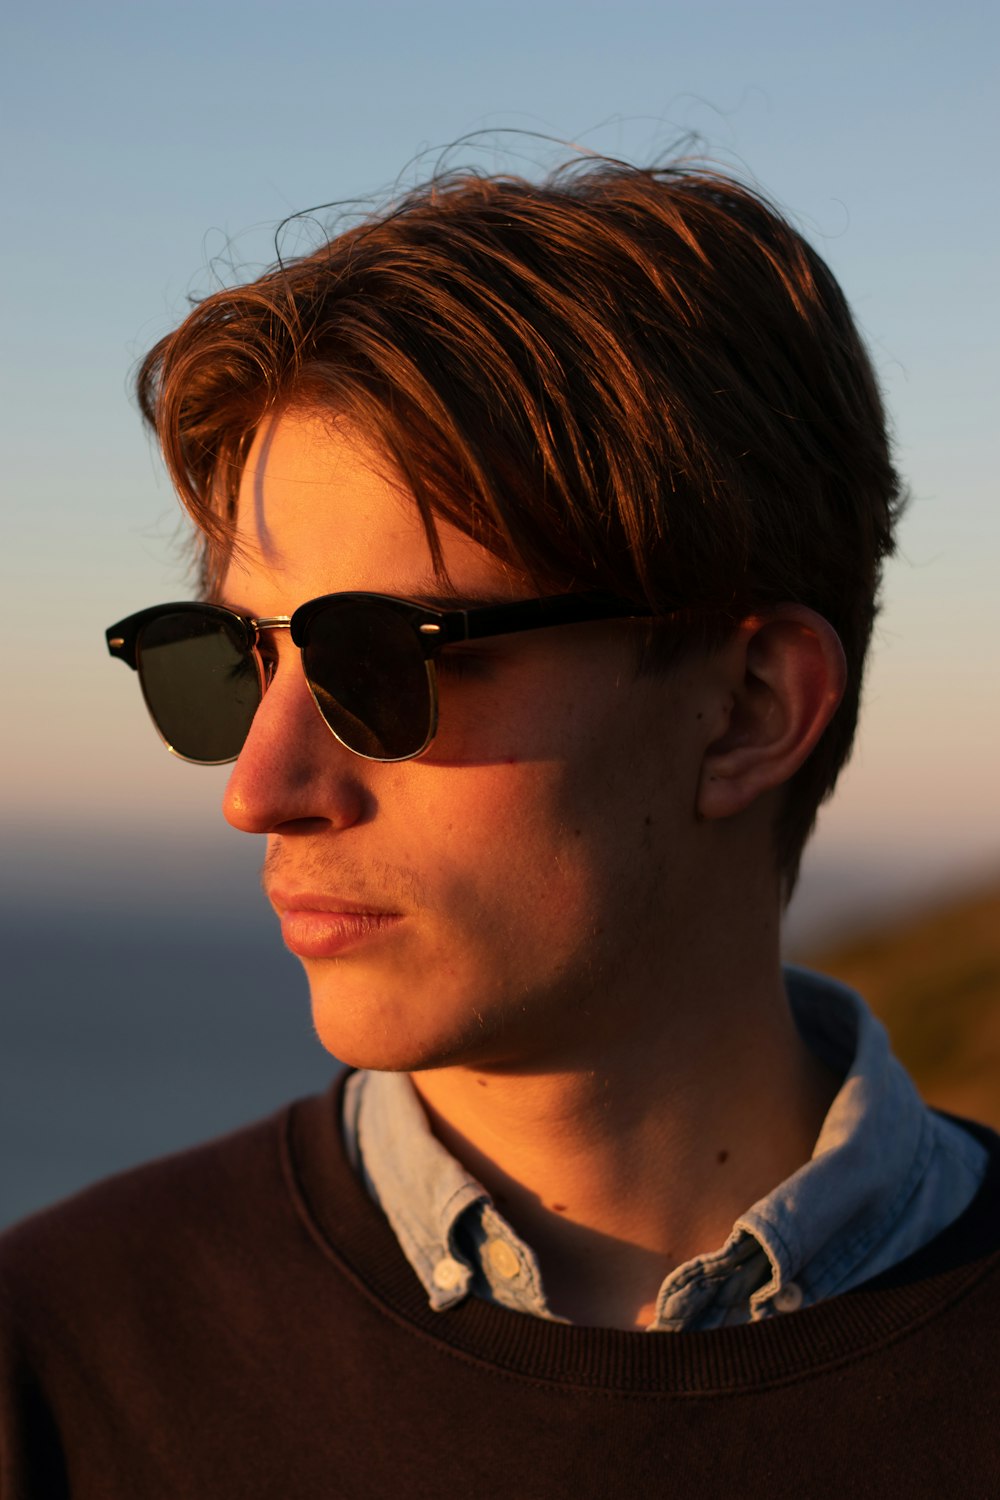 a young man wearing sunglasses looking off into the distance